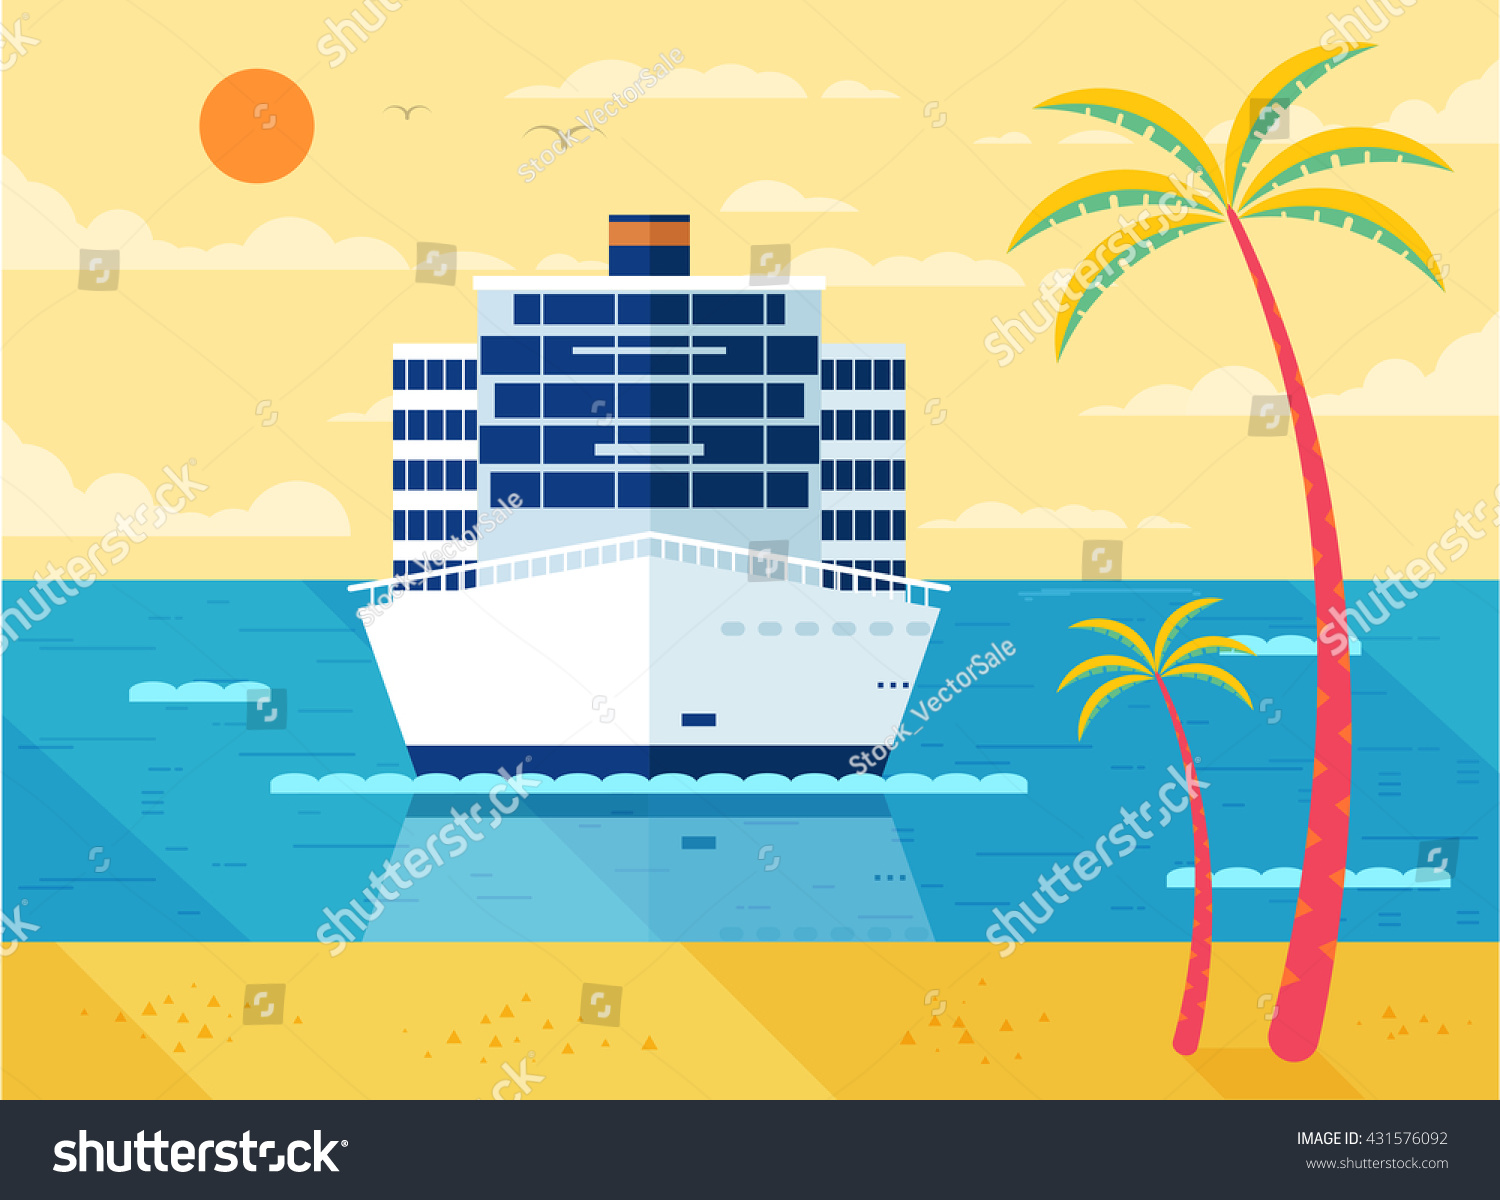 SVG of Stock Vector illustration of cruise ship in sea, front view near beach, palm trees, white liner,  in flat style for infographic svg